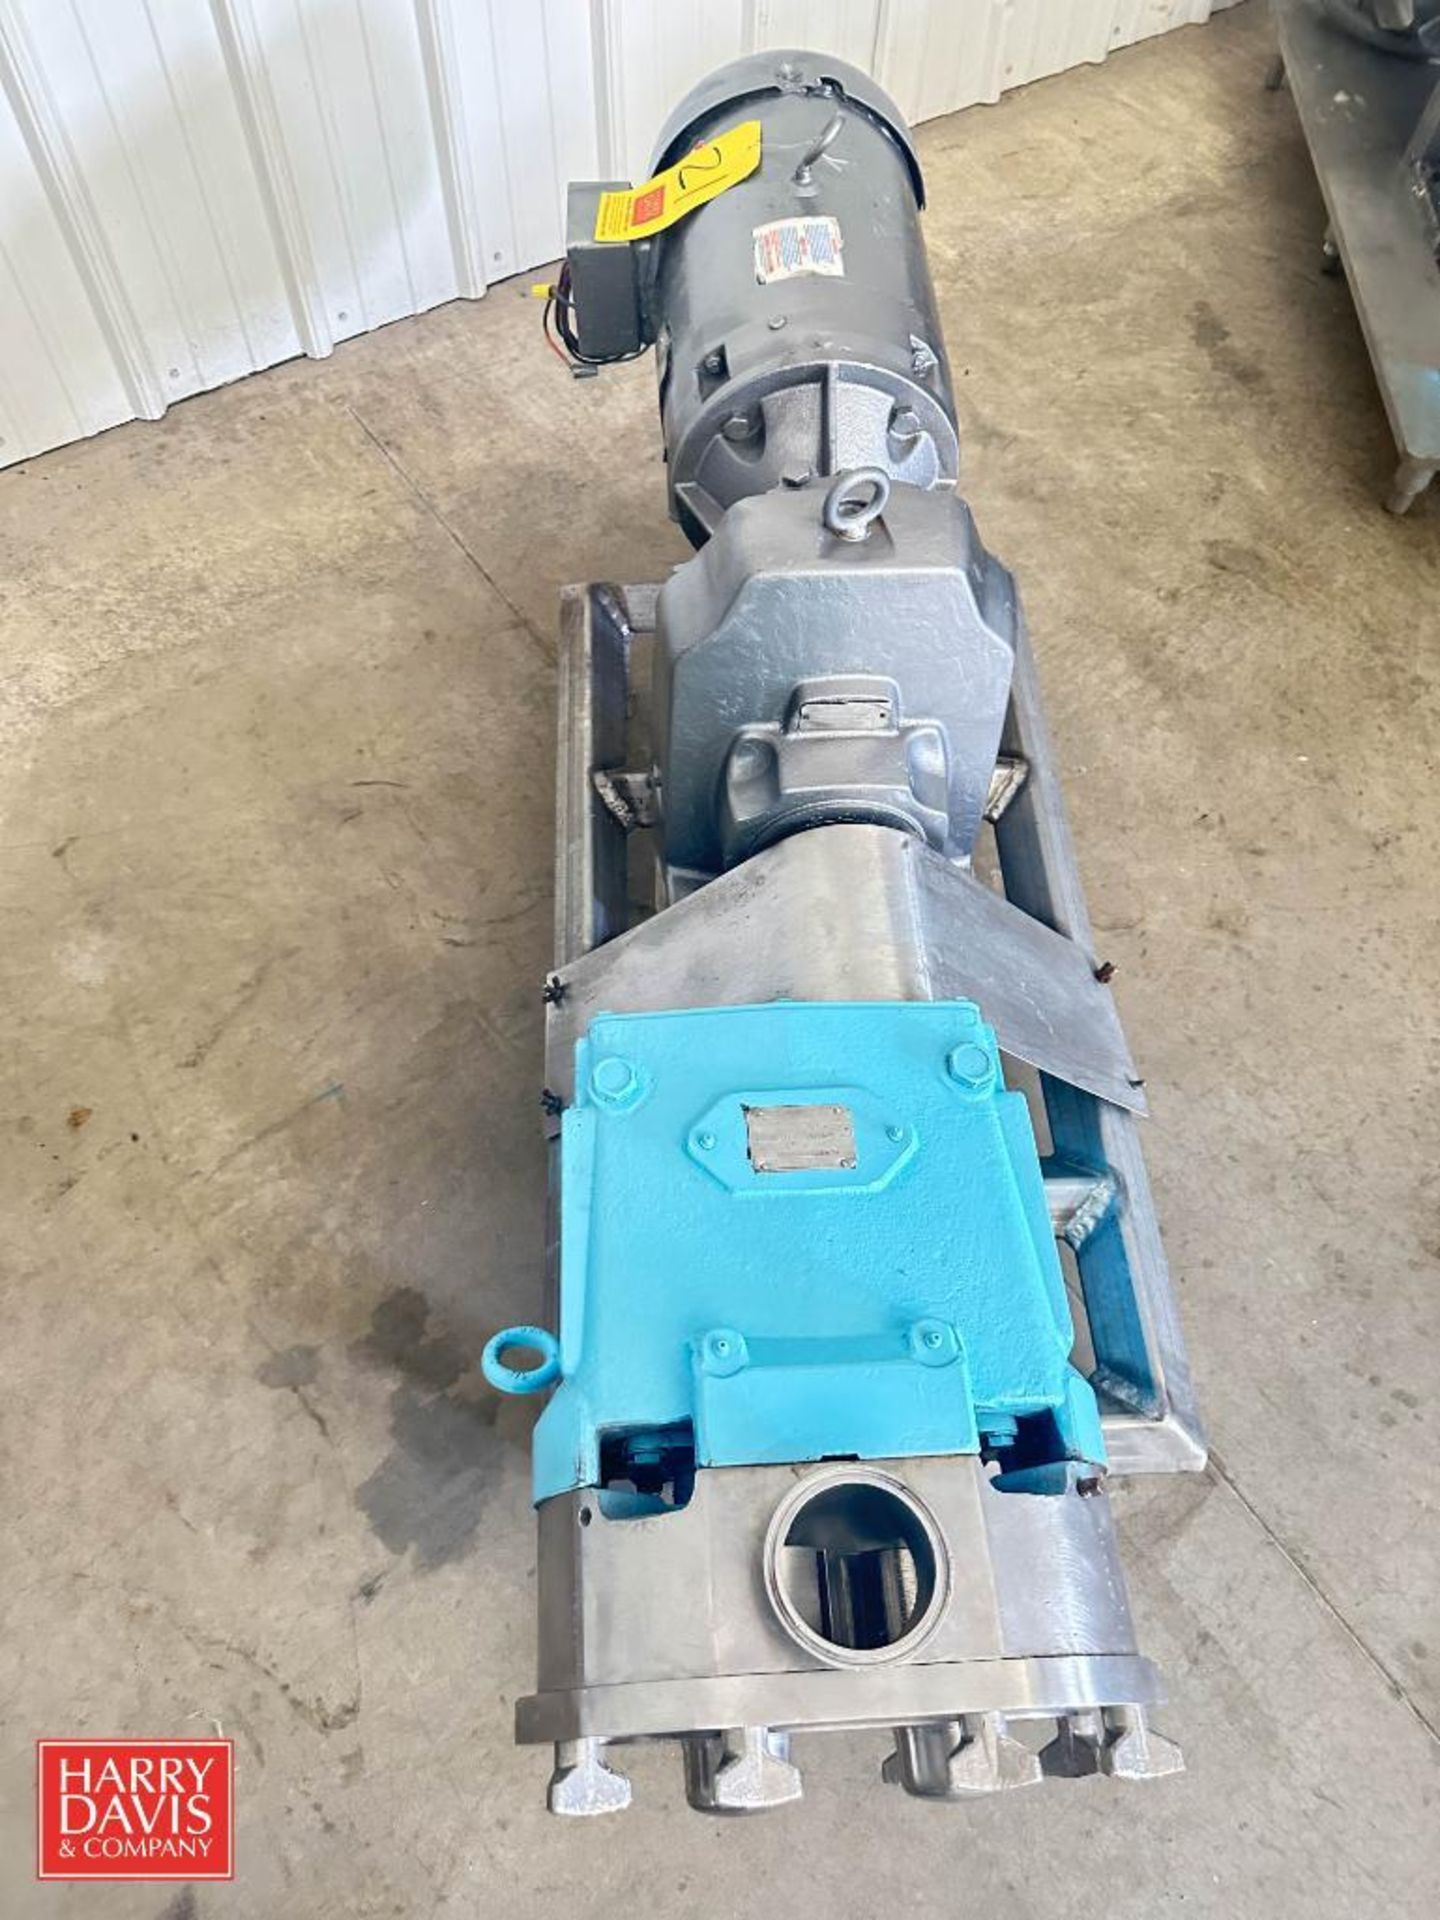 Waukesha Cherry-Burrell Positive Displacement Pump, Model: 120-U1 and Gear Reducing Drive - Image 5 of 5